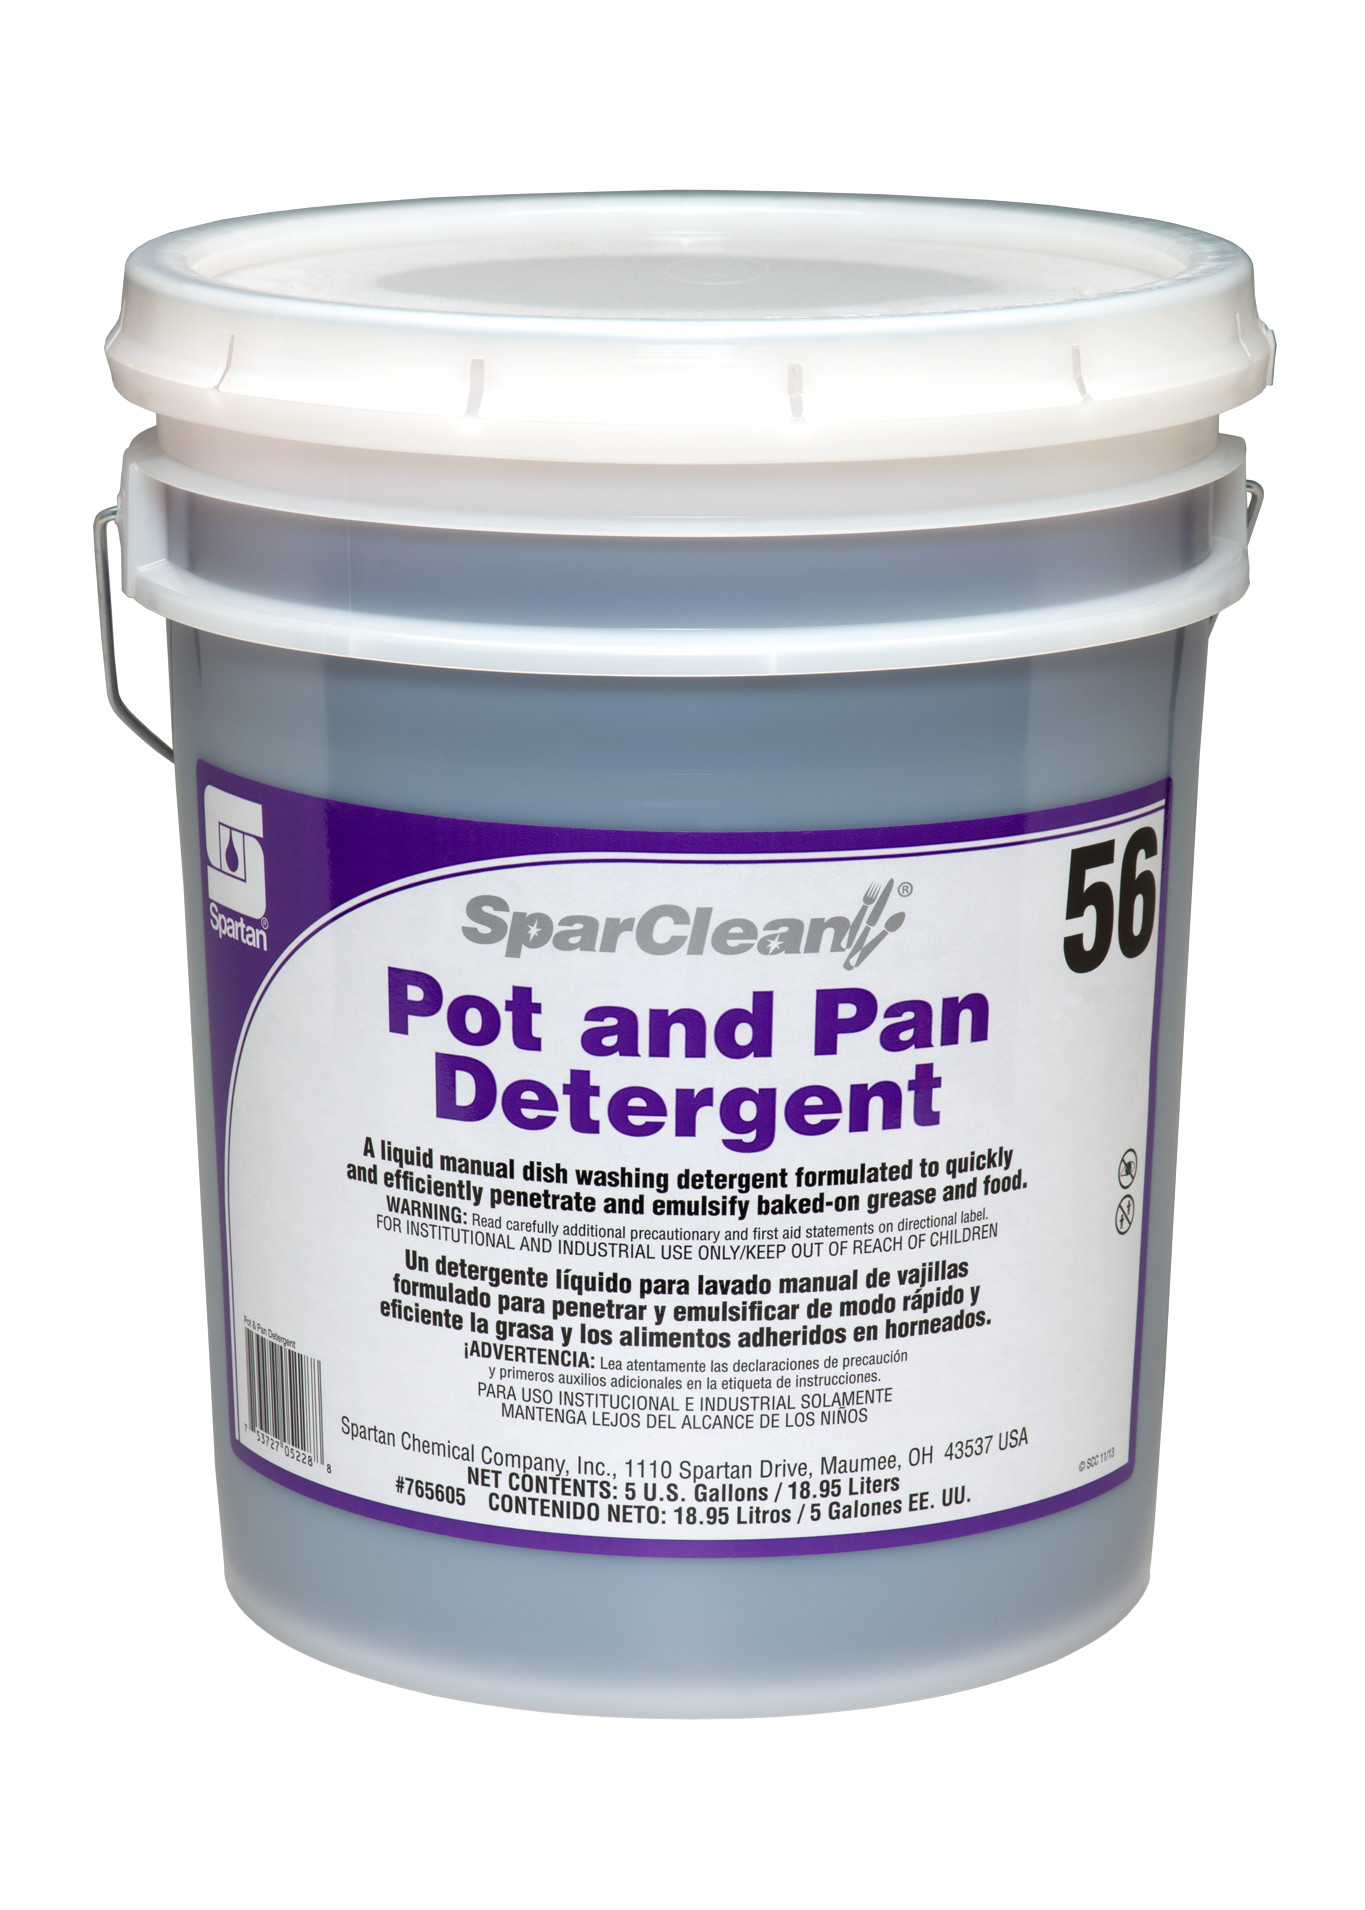 Spartan Chemical Company SparClean Pot and Pan Detergent 56, 5 GAL PAIL